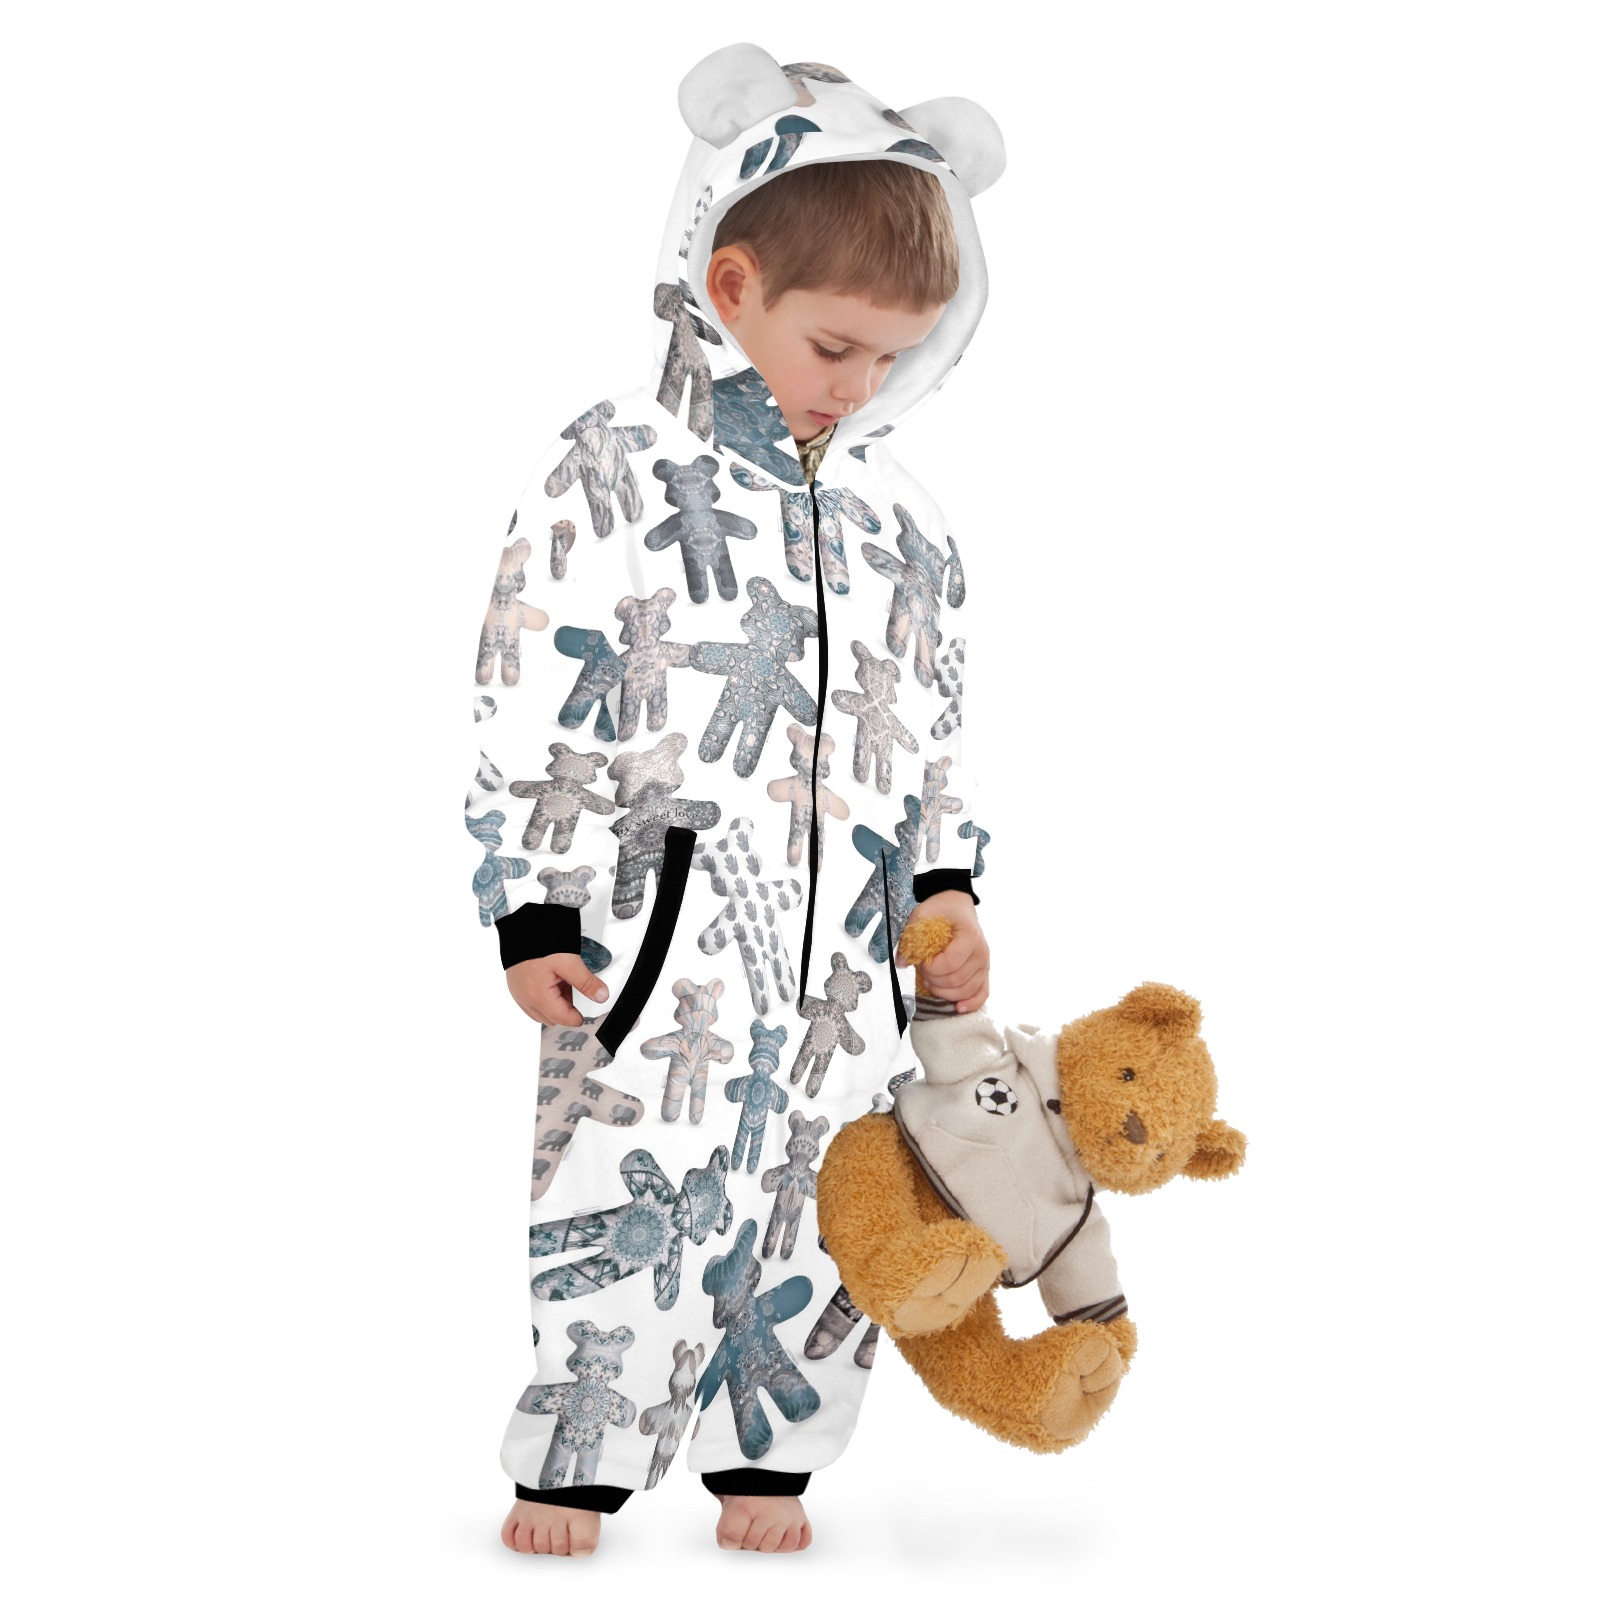 teddy bear assortiment 13 One-Piece Zip up Hooded Pajamas for Little Kids